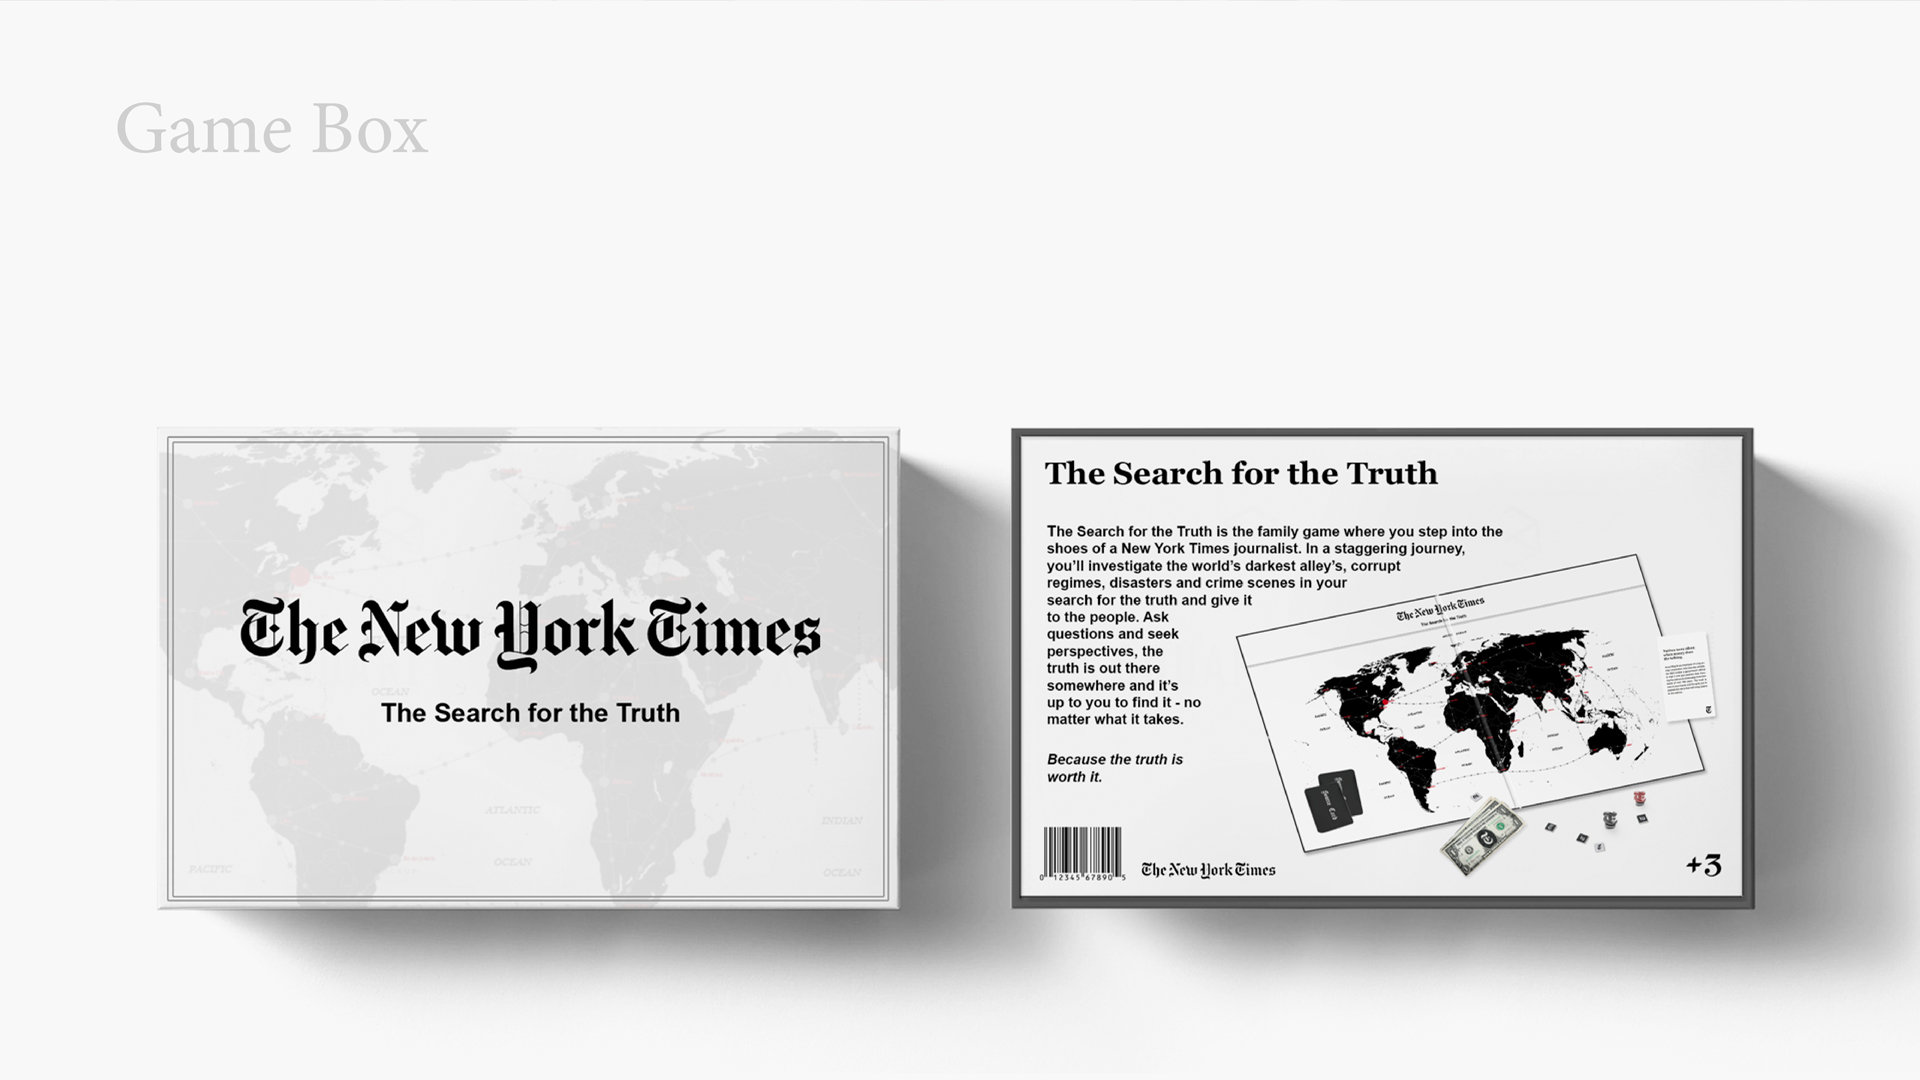 Game box of the board game: The New York Times: The Search for the truth